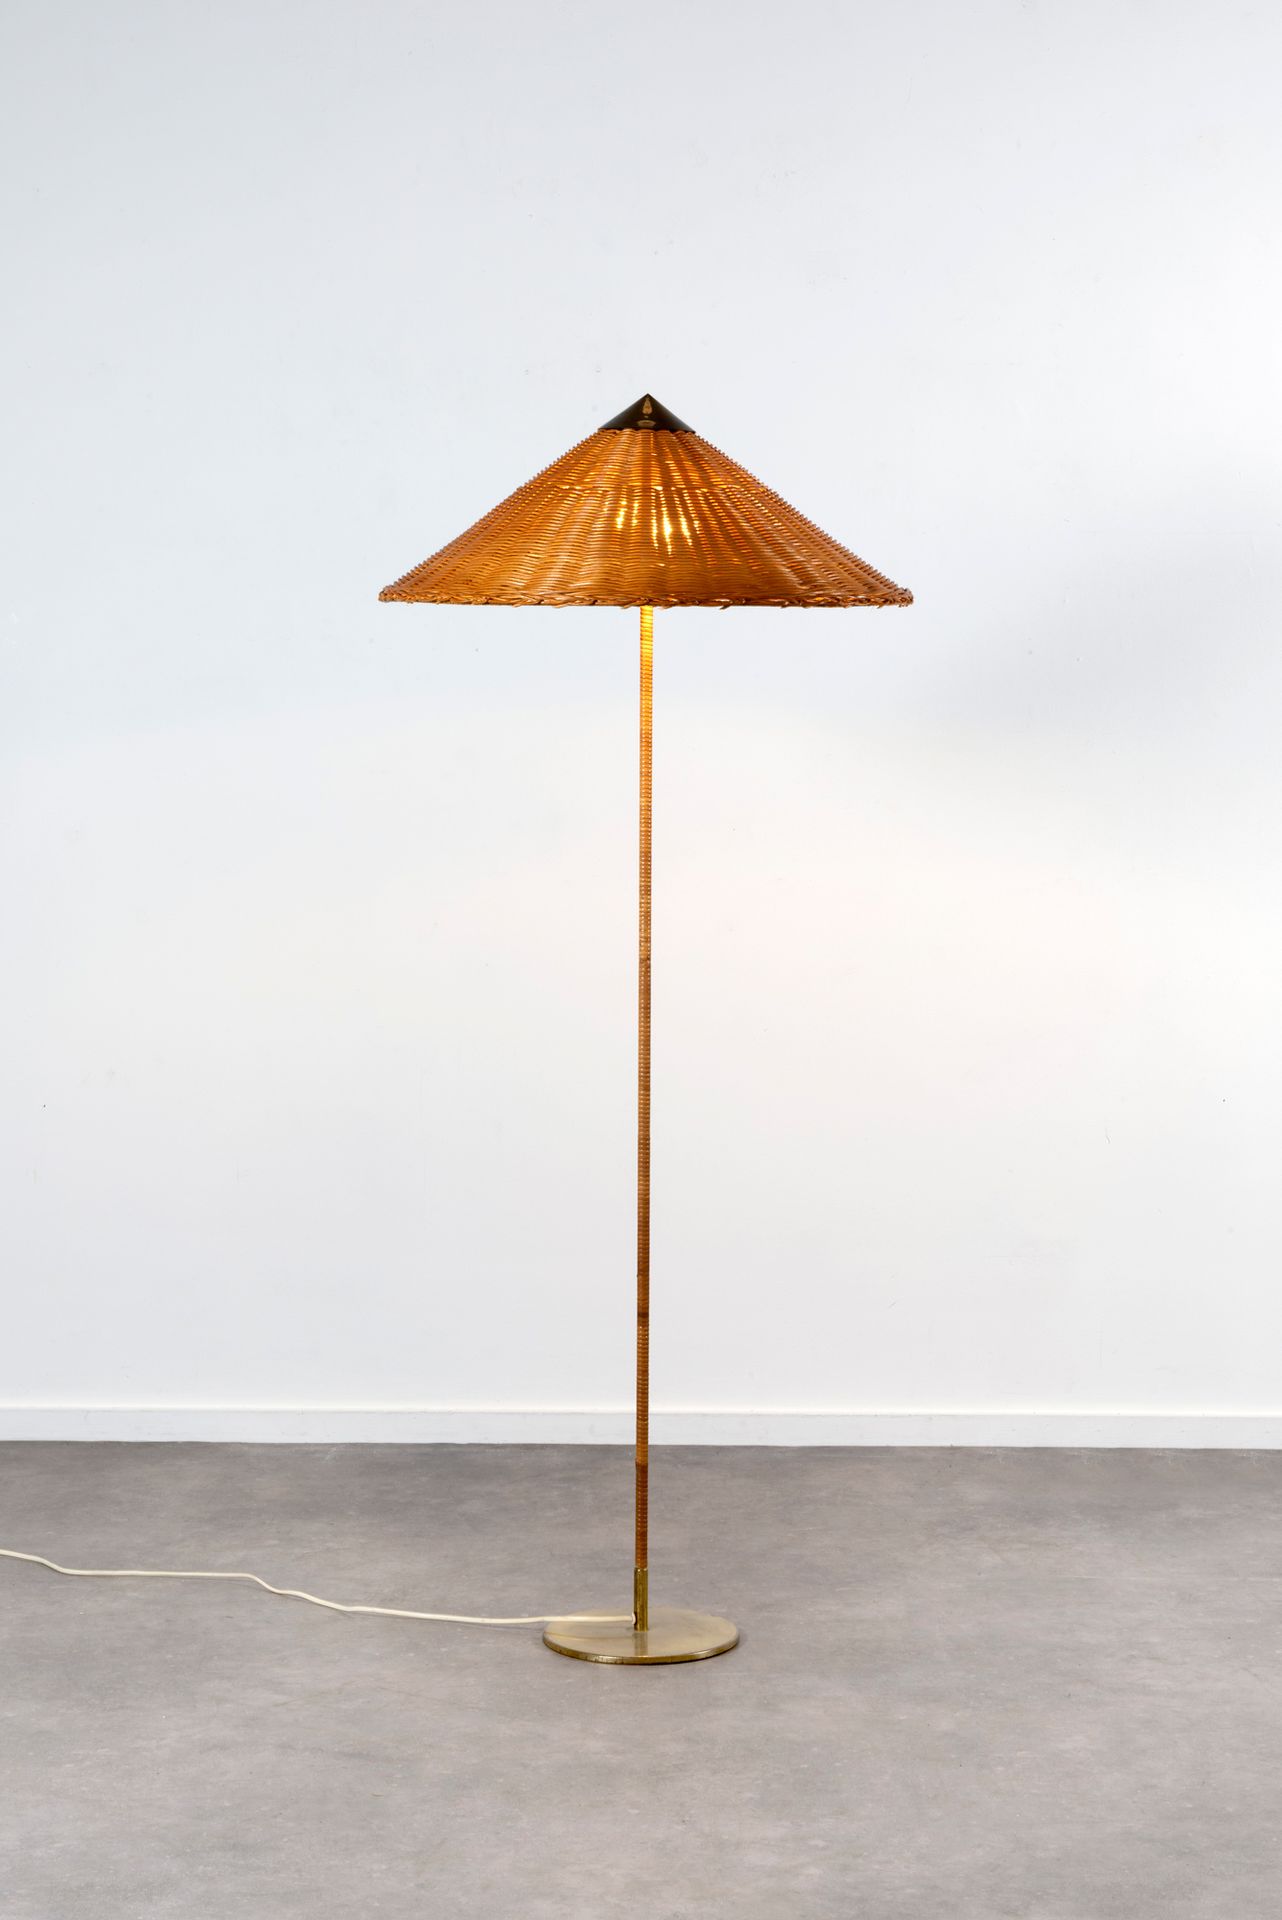 PAAVO TYNELL (1890-1973) Mod. Nr. 9602 - Chinese hat
Stehlampe.
Sockel aus Gusse&hellip;